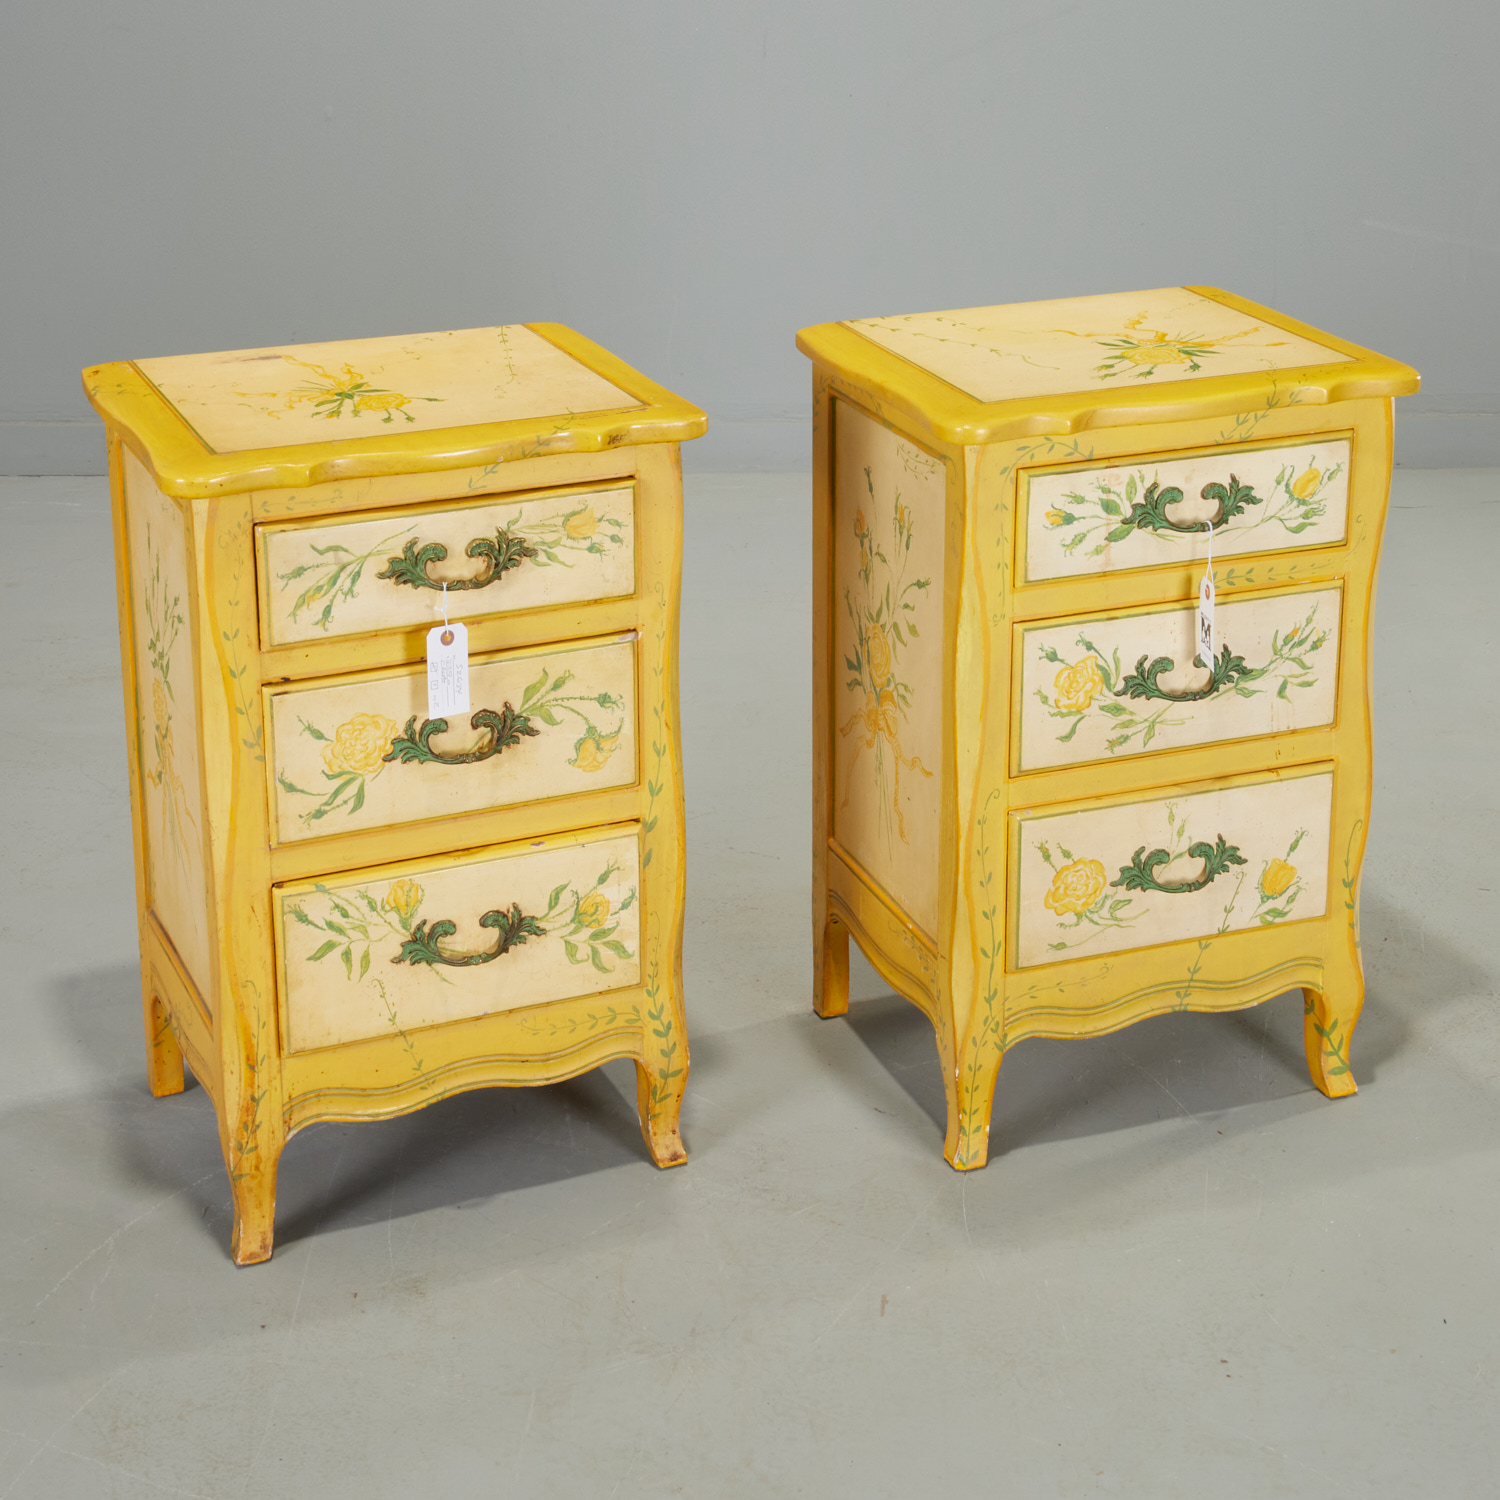 PAIR FRENCH STYLE PAINT DECORATED